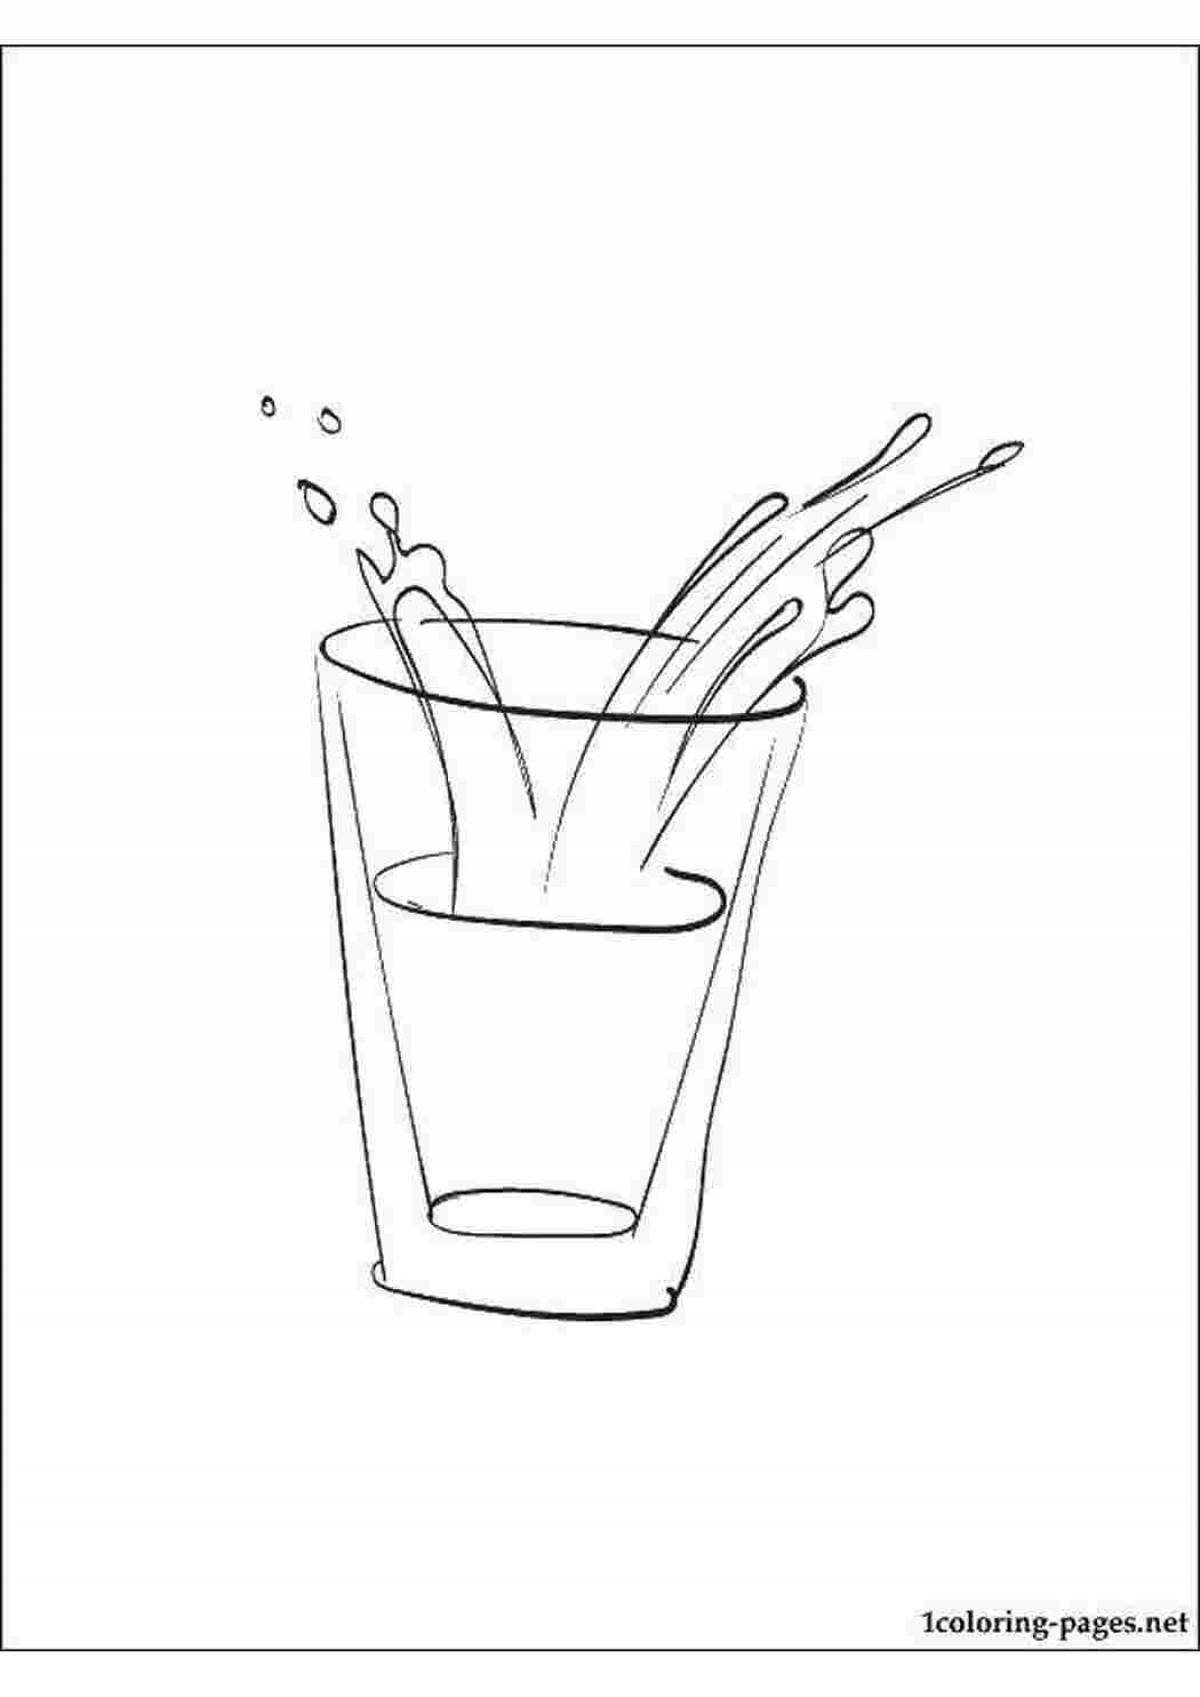 Glowing reflection coloring page for kids